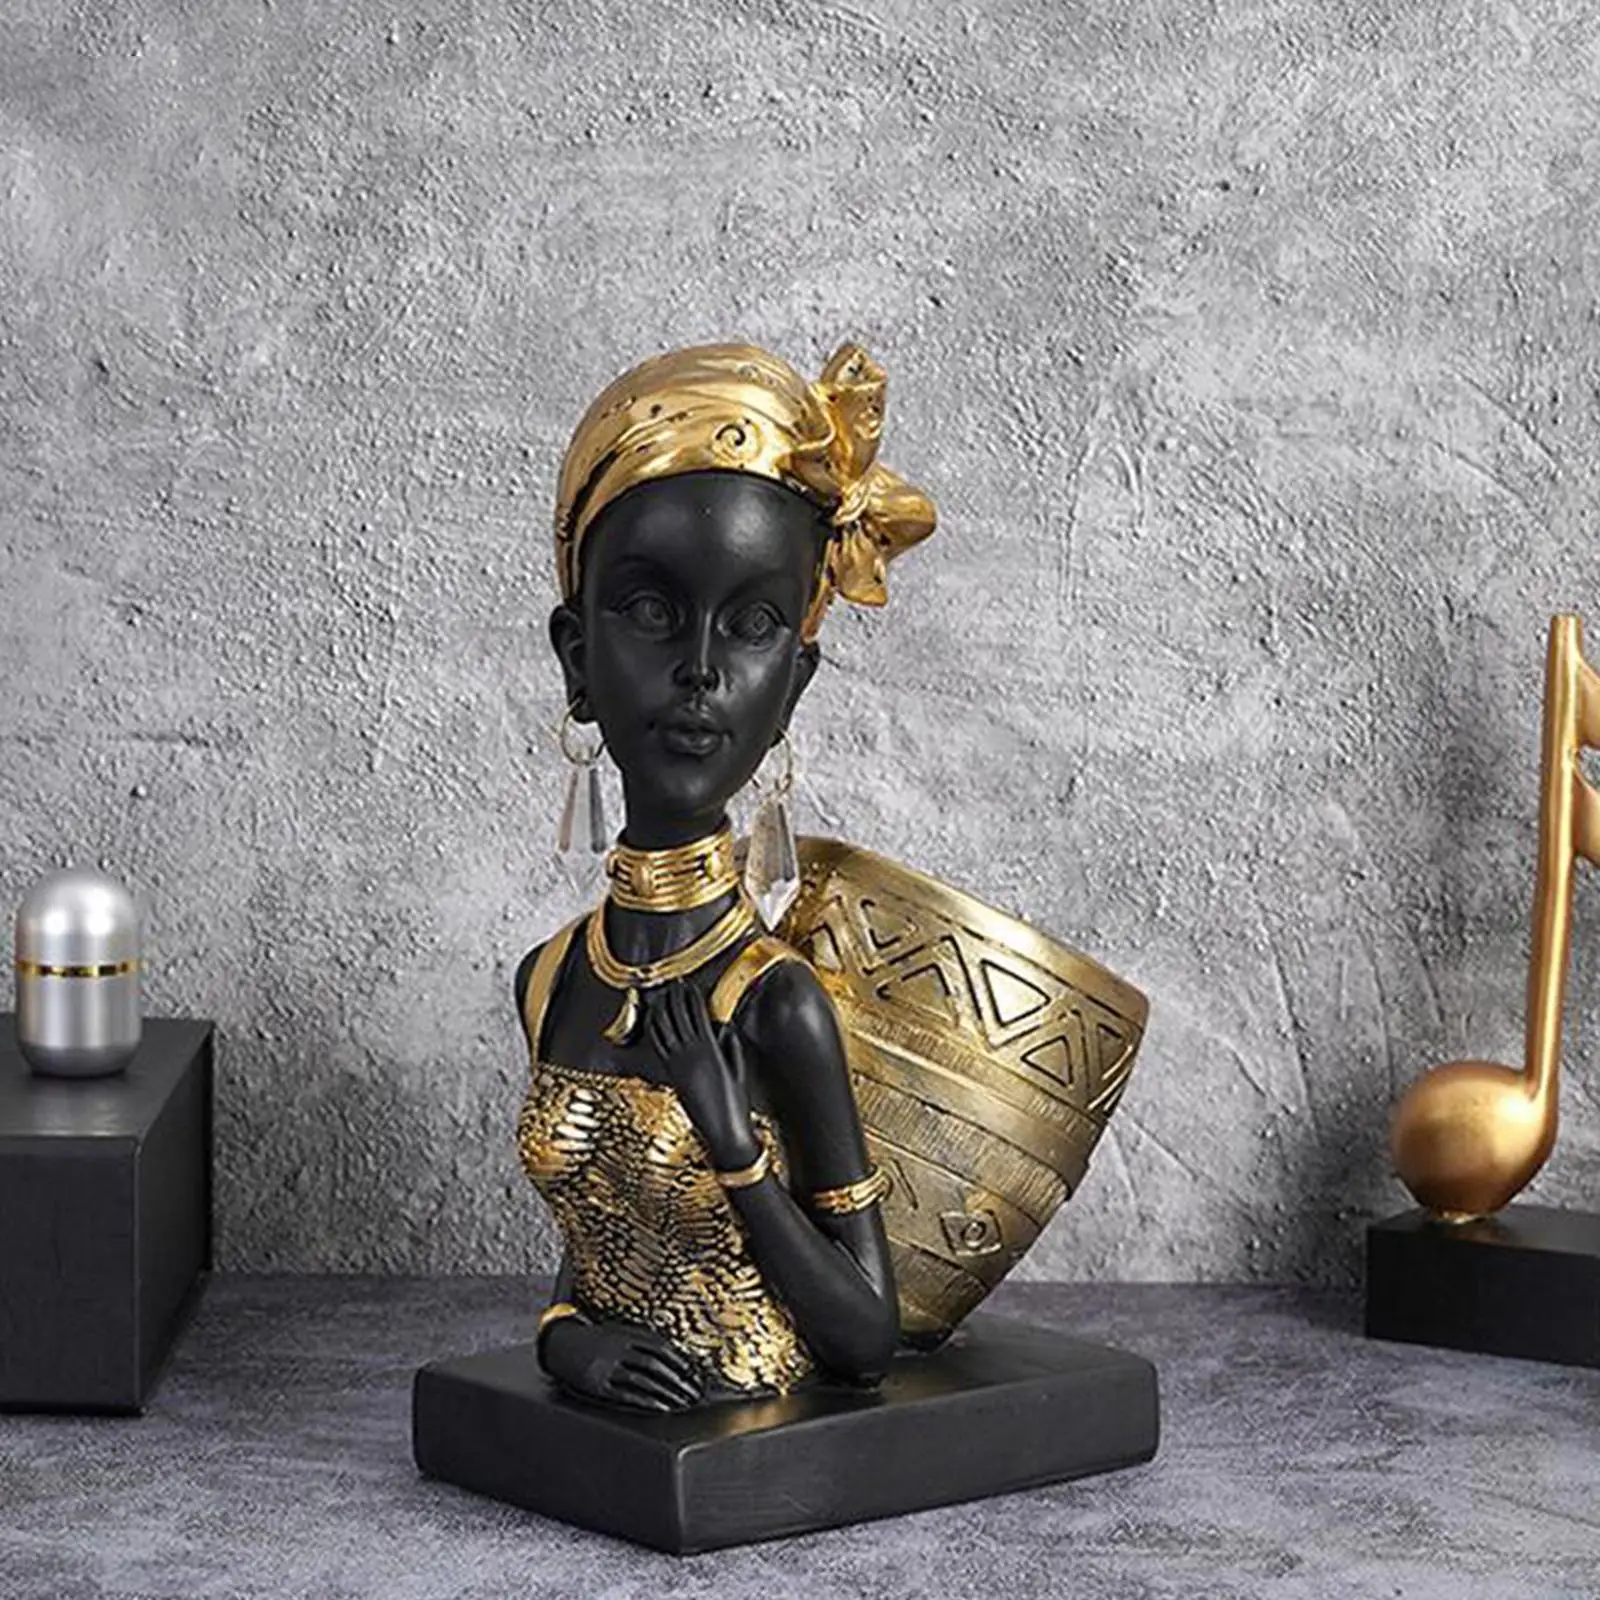 Vintage Style Lady Statue Sculpture African Figurines Human for Bookshelf Table Hotel